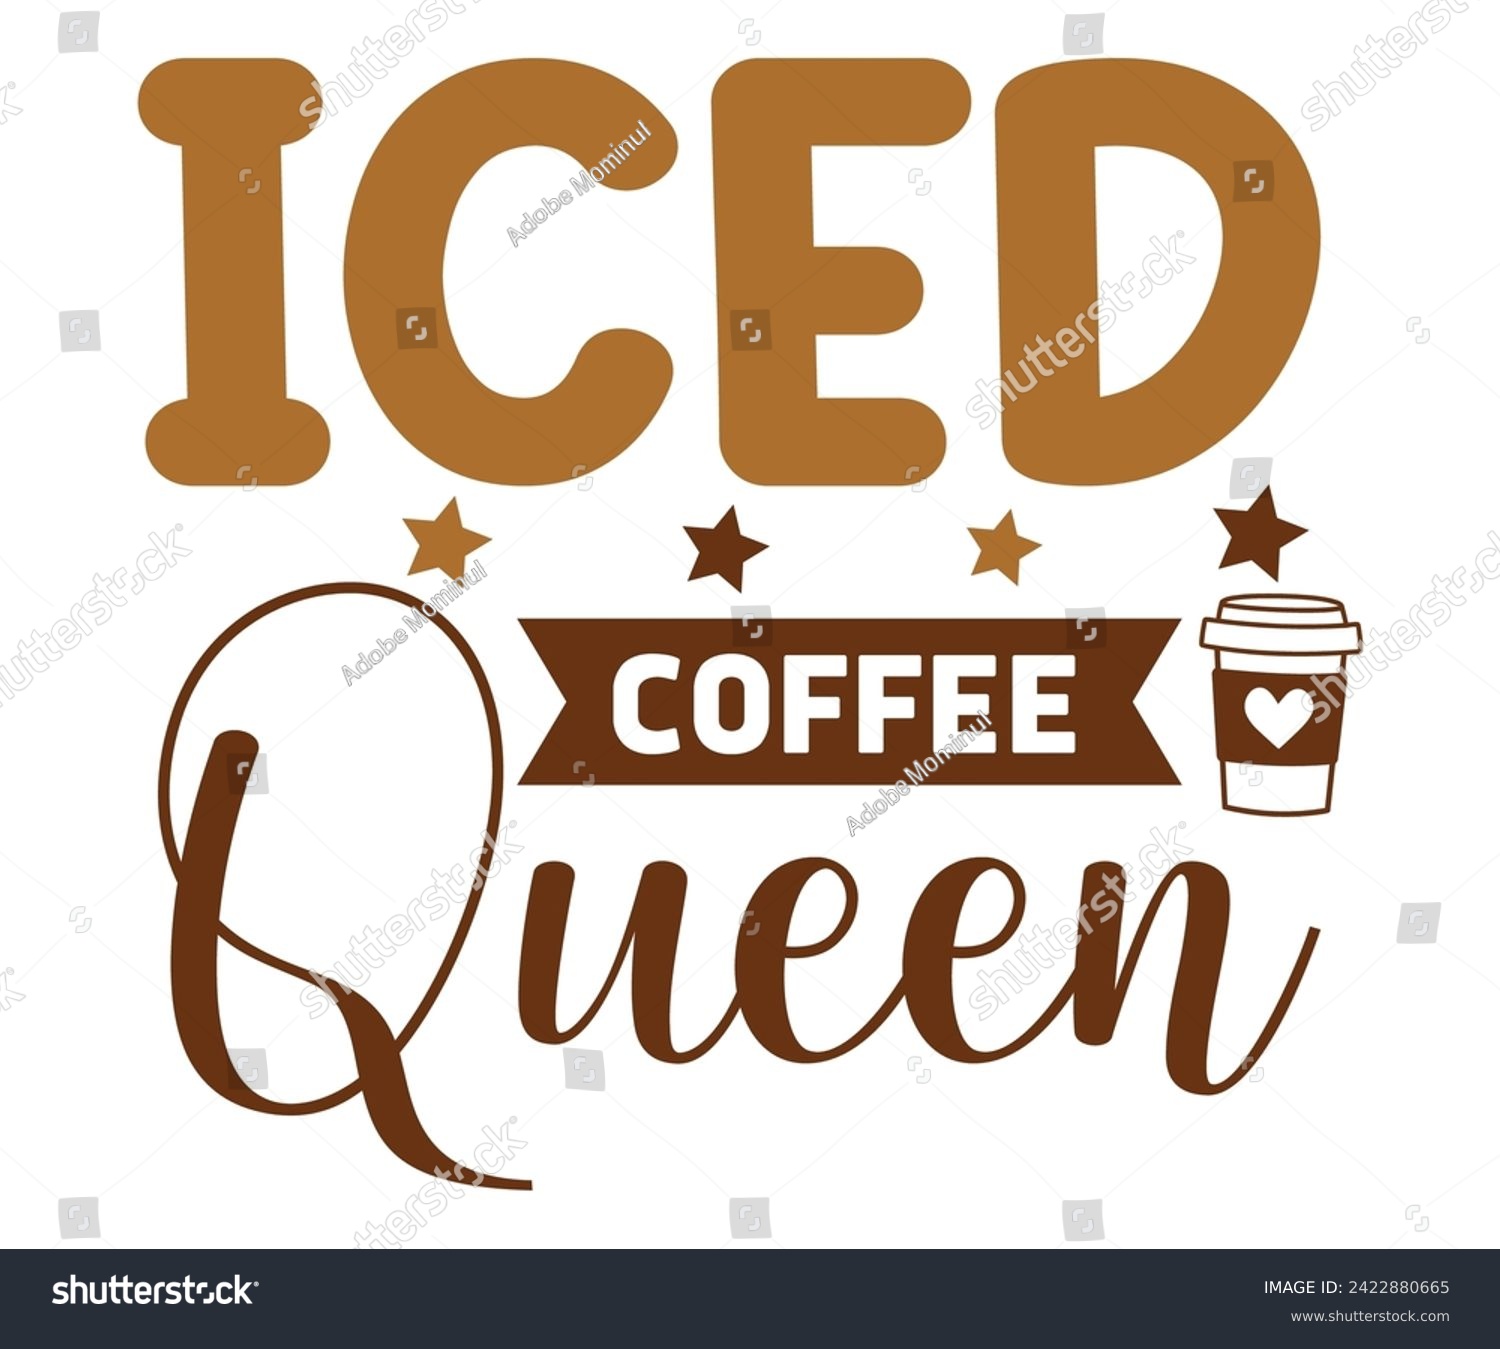 SVG of Iced Coffee Queen Svg,Coffee Svg,Coffee Retro,Funny Coffee Sayings,Coffee Mug Svg,Coffee Cup Svg,Gift For Coffee,Coffee Lover,Caffeine Svg,Svg Cut File,Coffee Quotes,Sublimation Design, svg